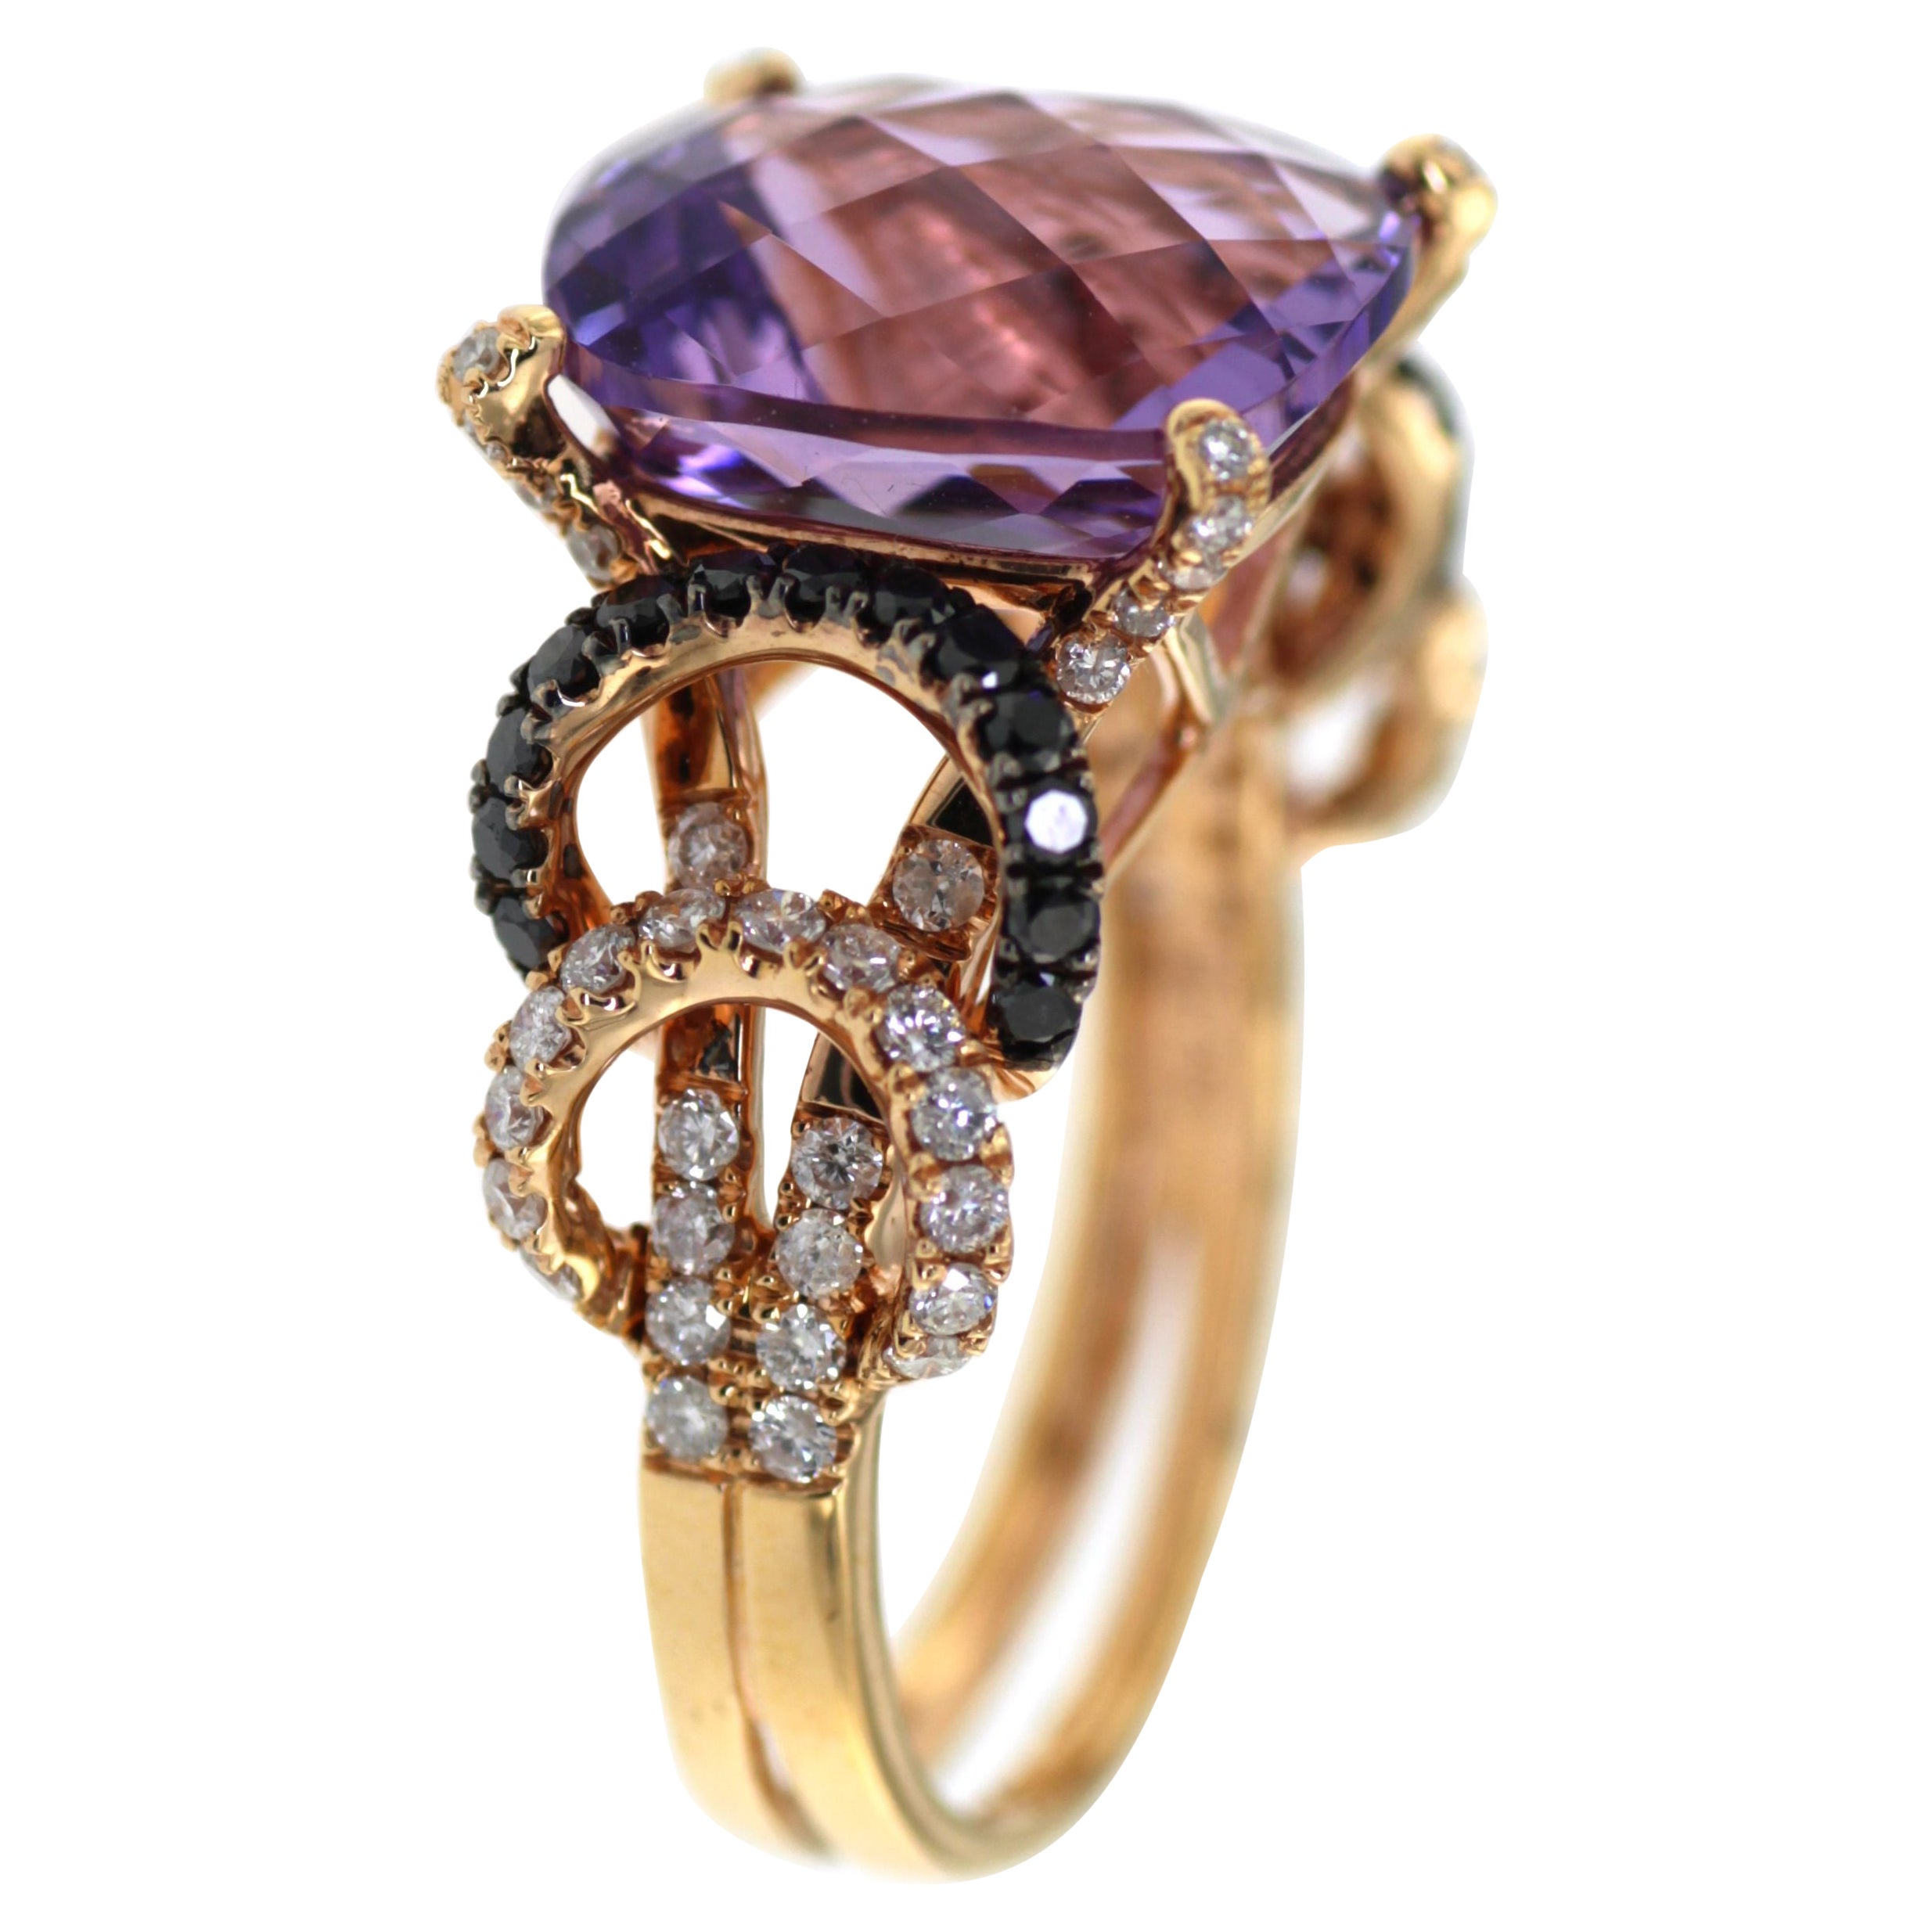 Indulge in the mesmerizing beauty of our exquisite Amethyst and Diamond Ring set in 18 Karat Rose Gold. This captivating piece showcases a magnificent 6.44 carat cushion-cut amethyst, radiating a stunning purple hue that captures the